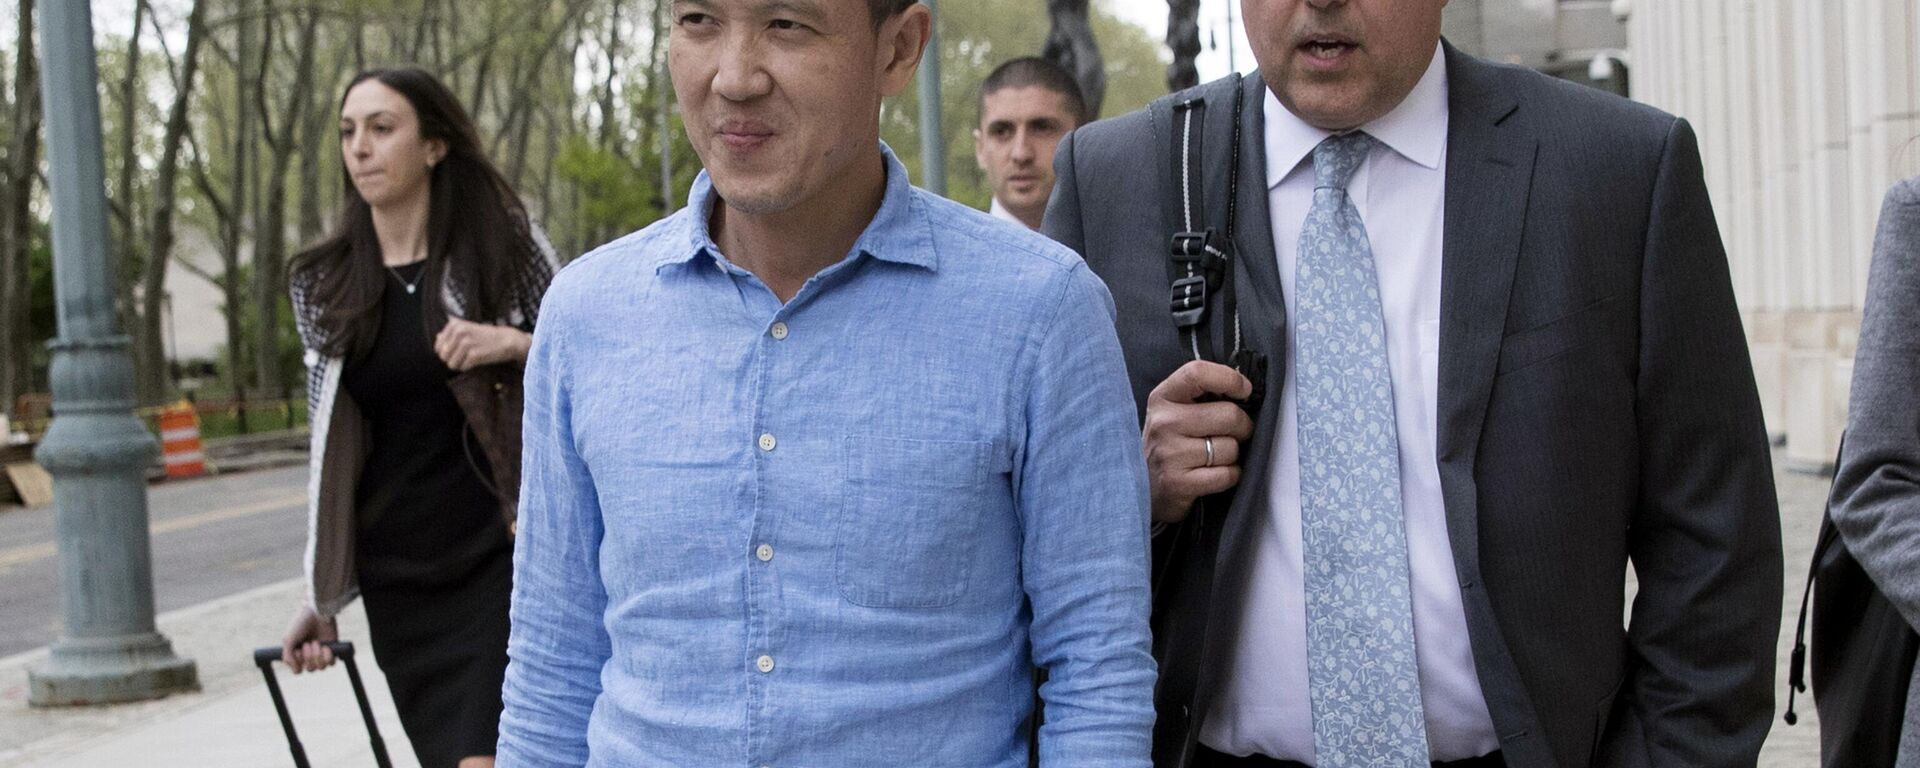 Former Goldman Sachs executive Roger Ng, center, leaves Brooklyn Federal court with attorney Marc Agnifilo, right, May 6, 2019, in New York. - Sputnik International, 1920, 10.03.2023